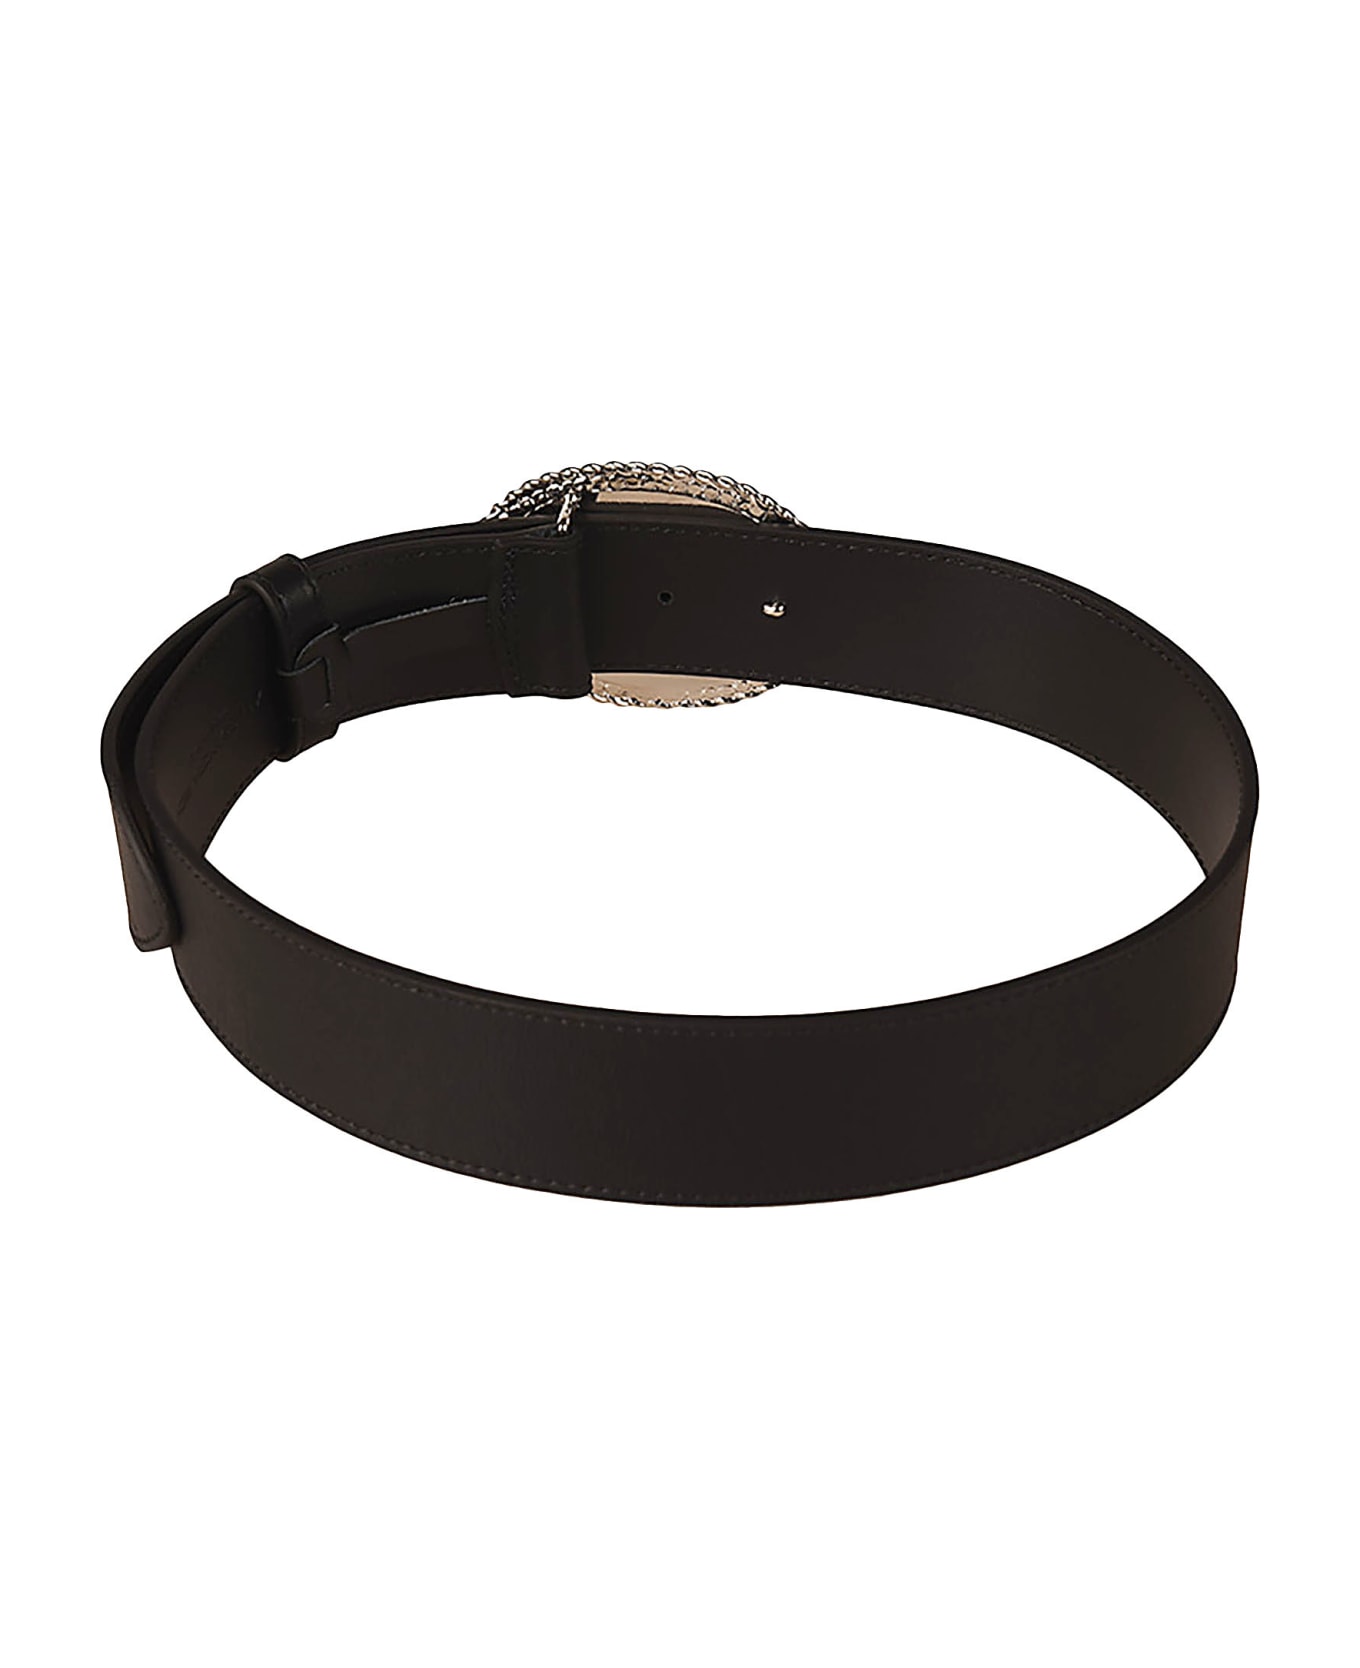 Alessandra Rich Oval Buckle Pearl Detail Leather Belt - Black/Silver ベルト